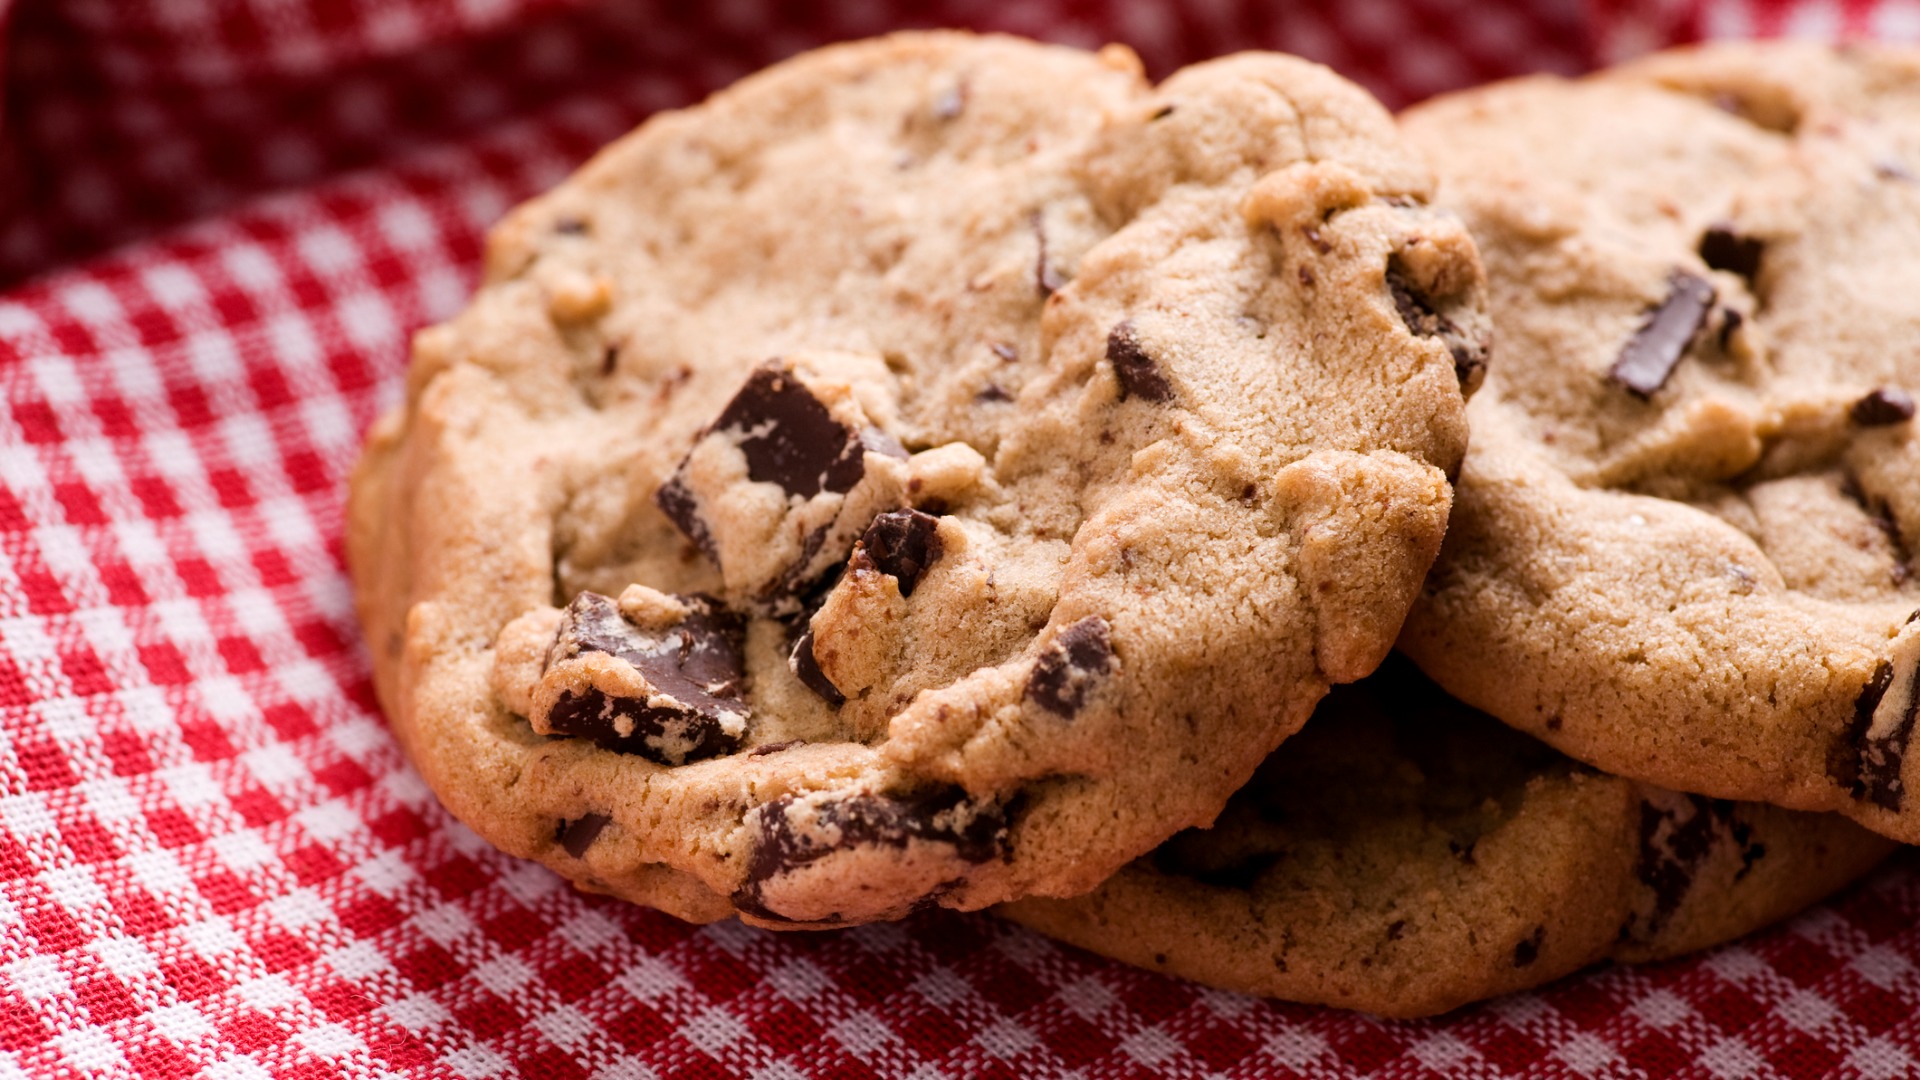 National Cookie Day Means Lots of Free Cookies — Here’s How To Score Great Deals This Saturday